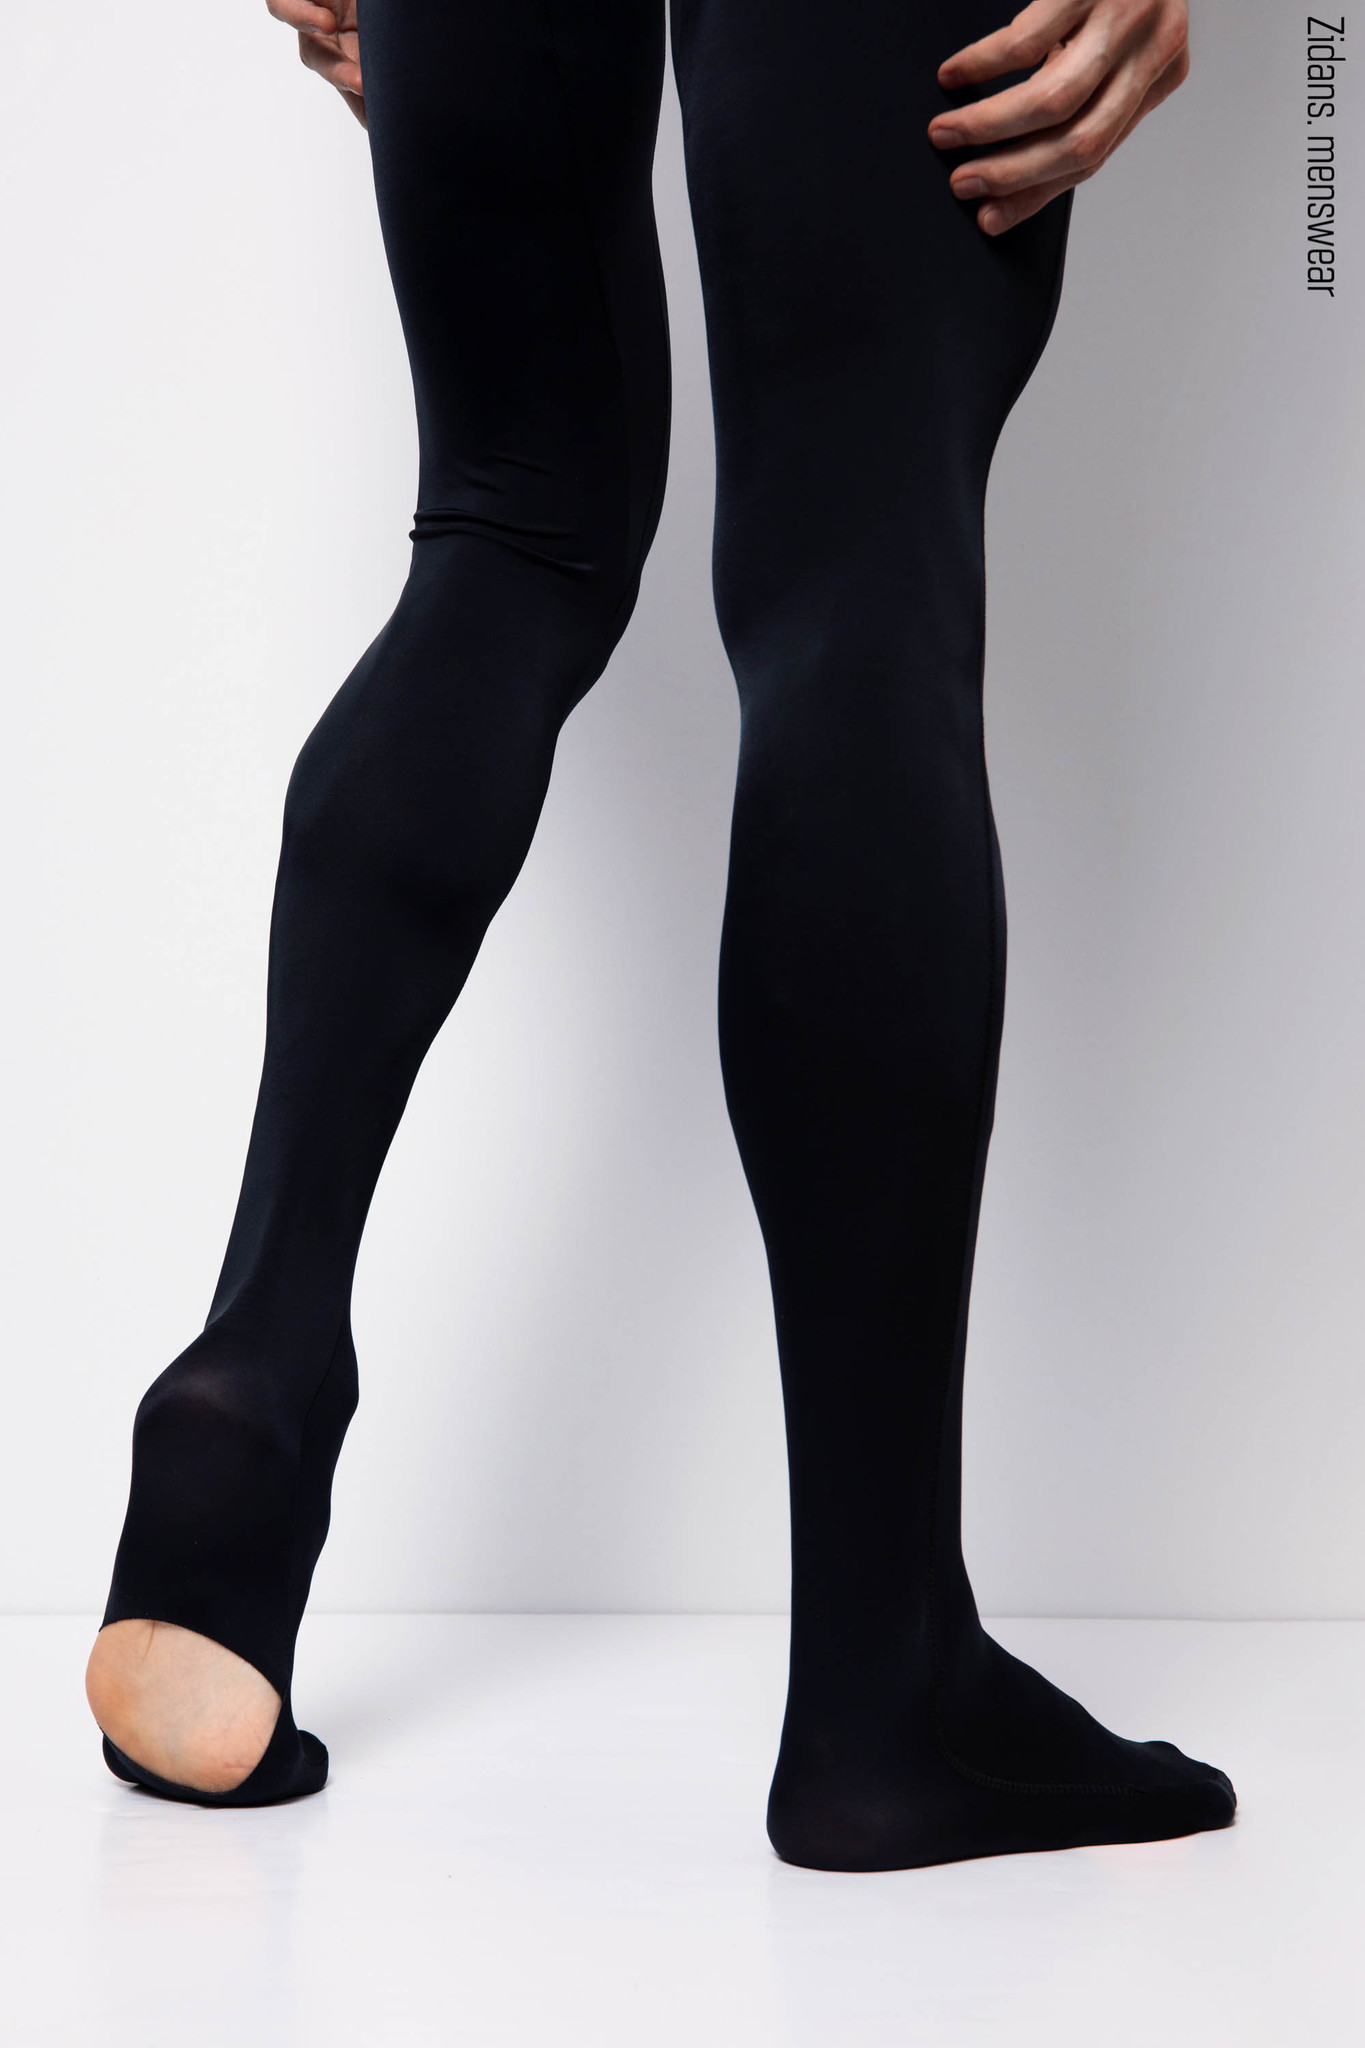 Men’s convertible tights with detachable straps for ballet